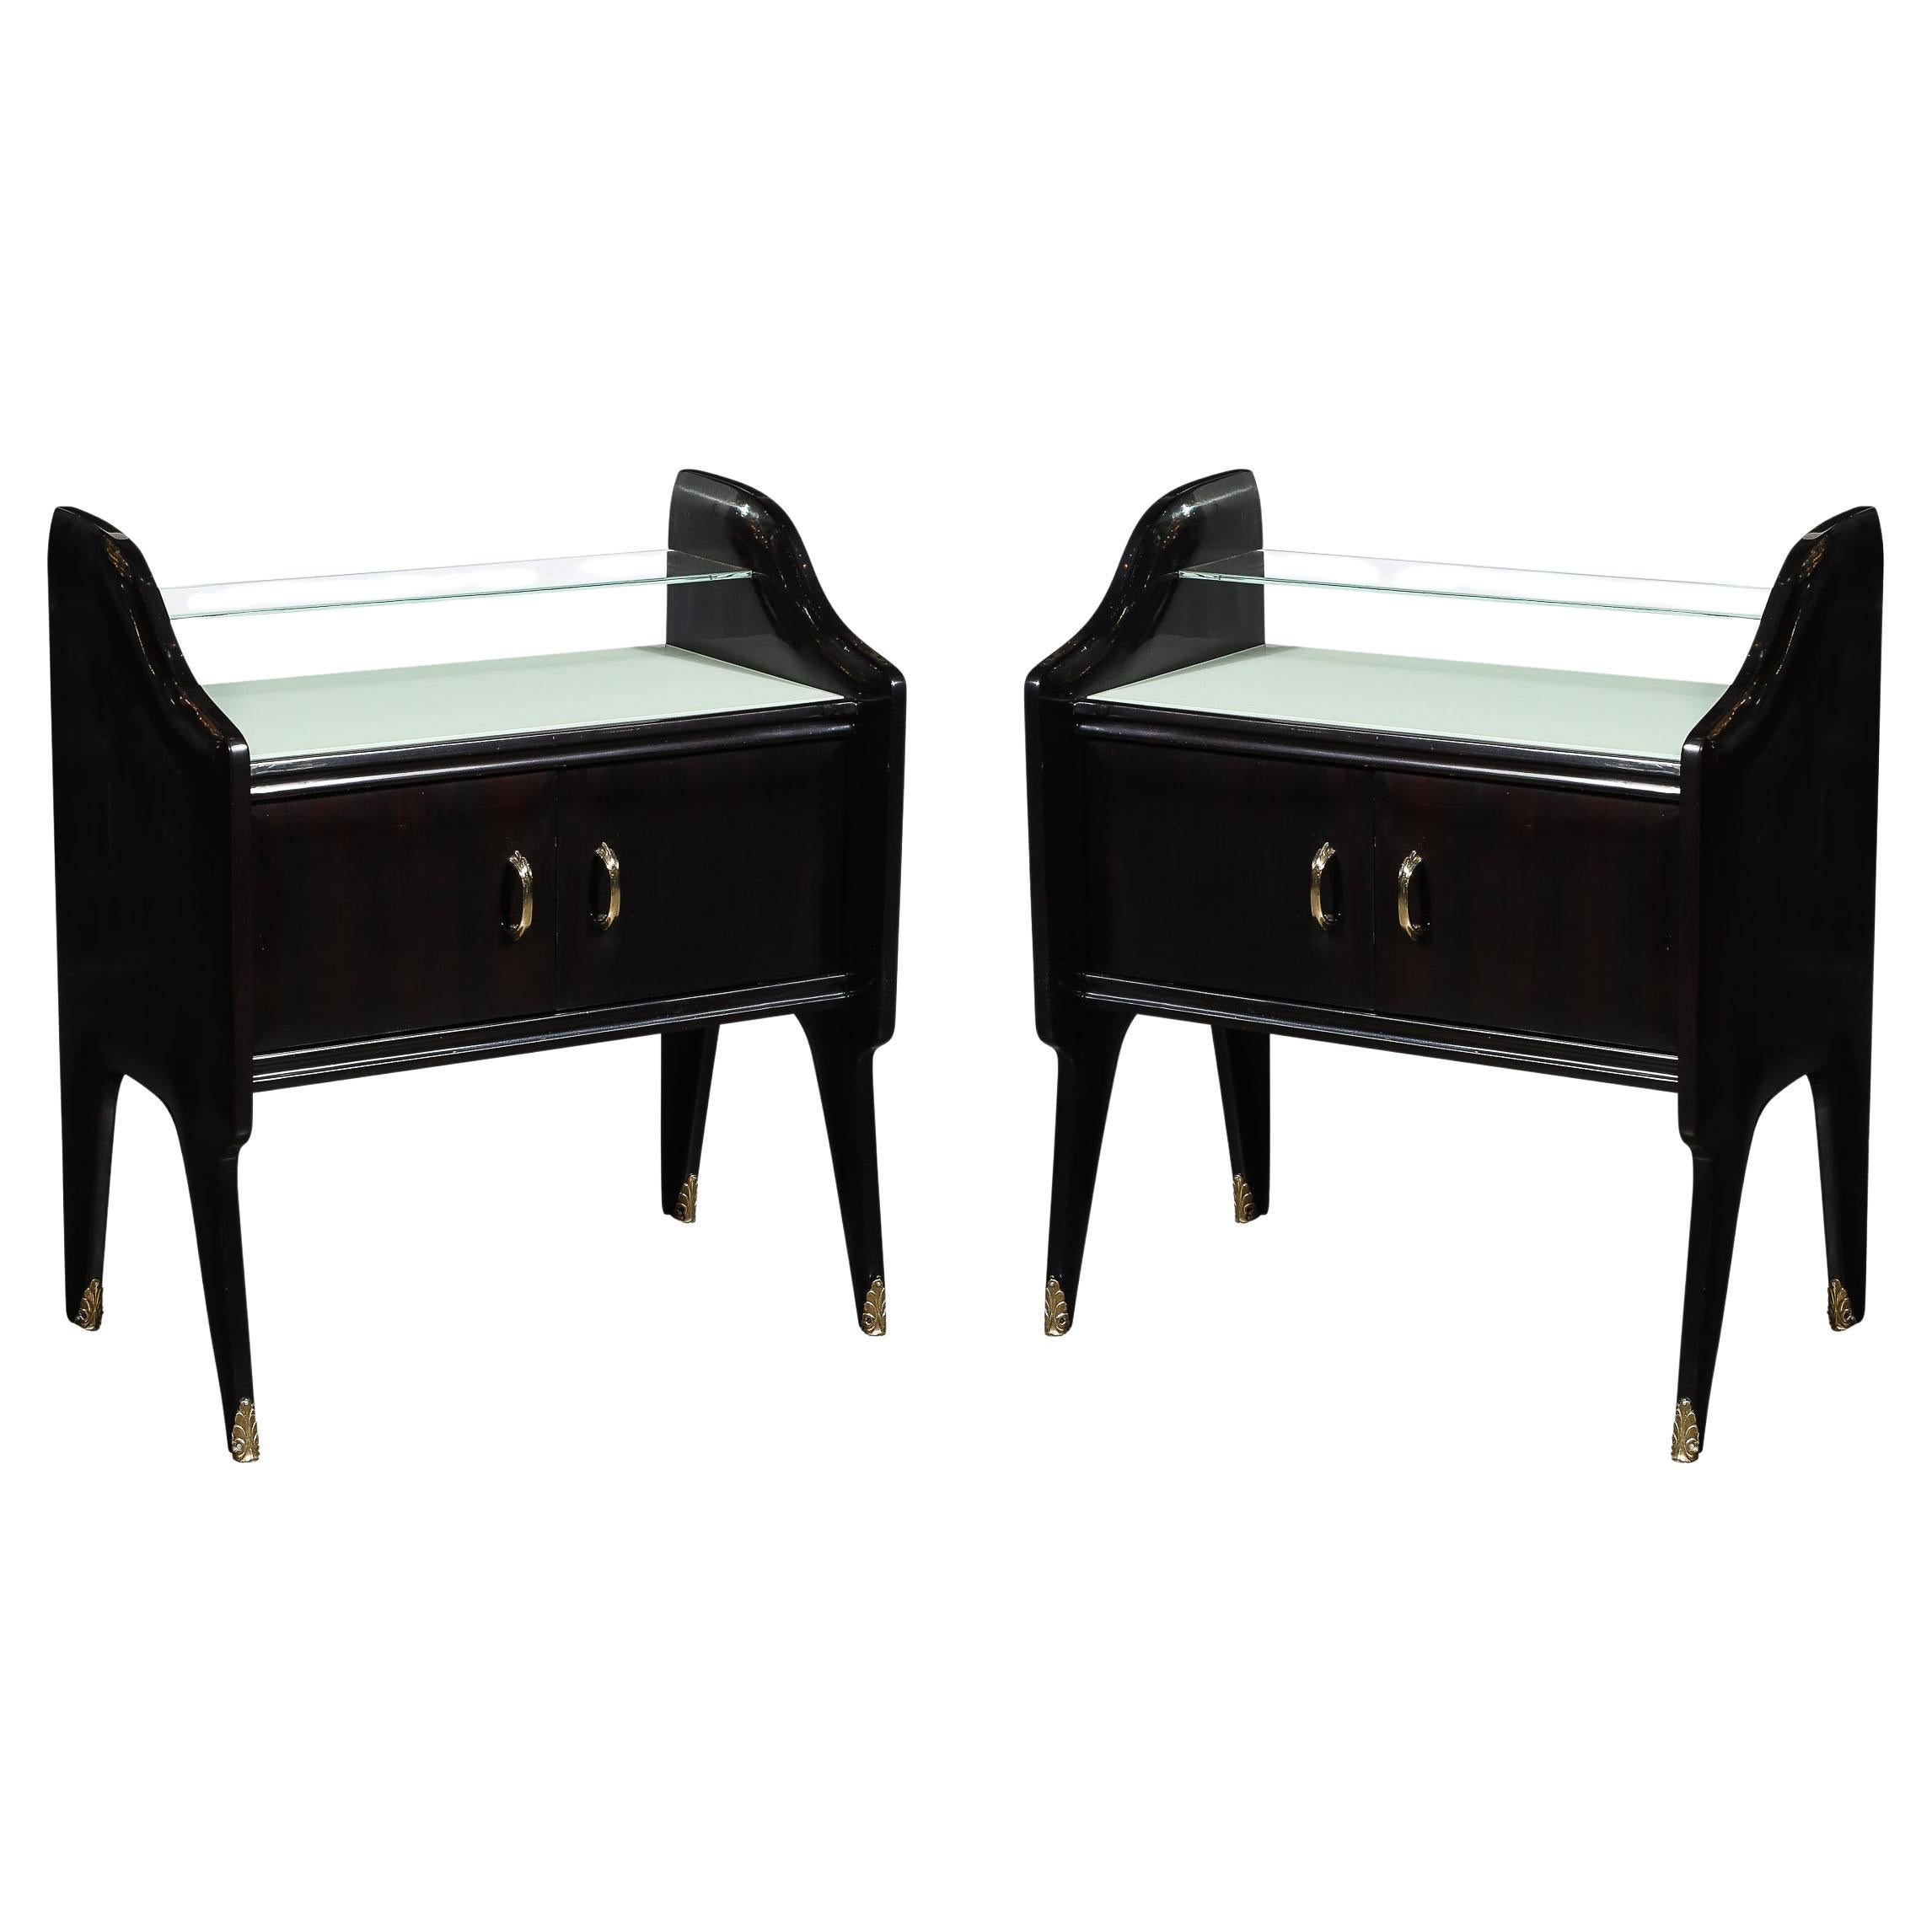 Pair of Mid-Century Ebonized Walnut & Brass Sculptural Nightstands by Ico Parisi For Sale